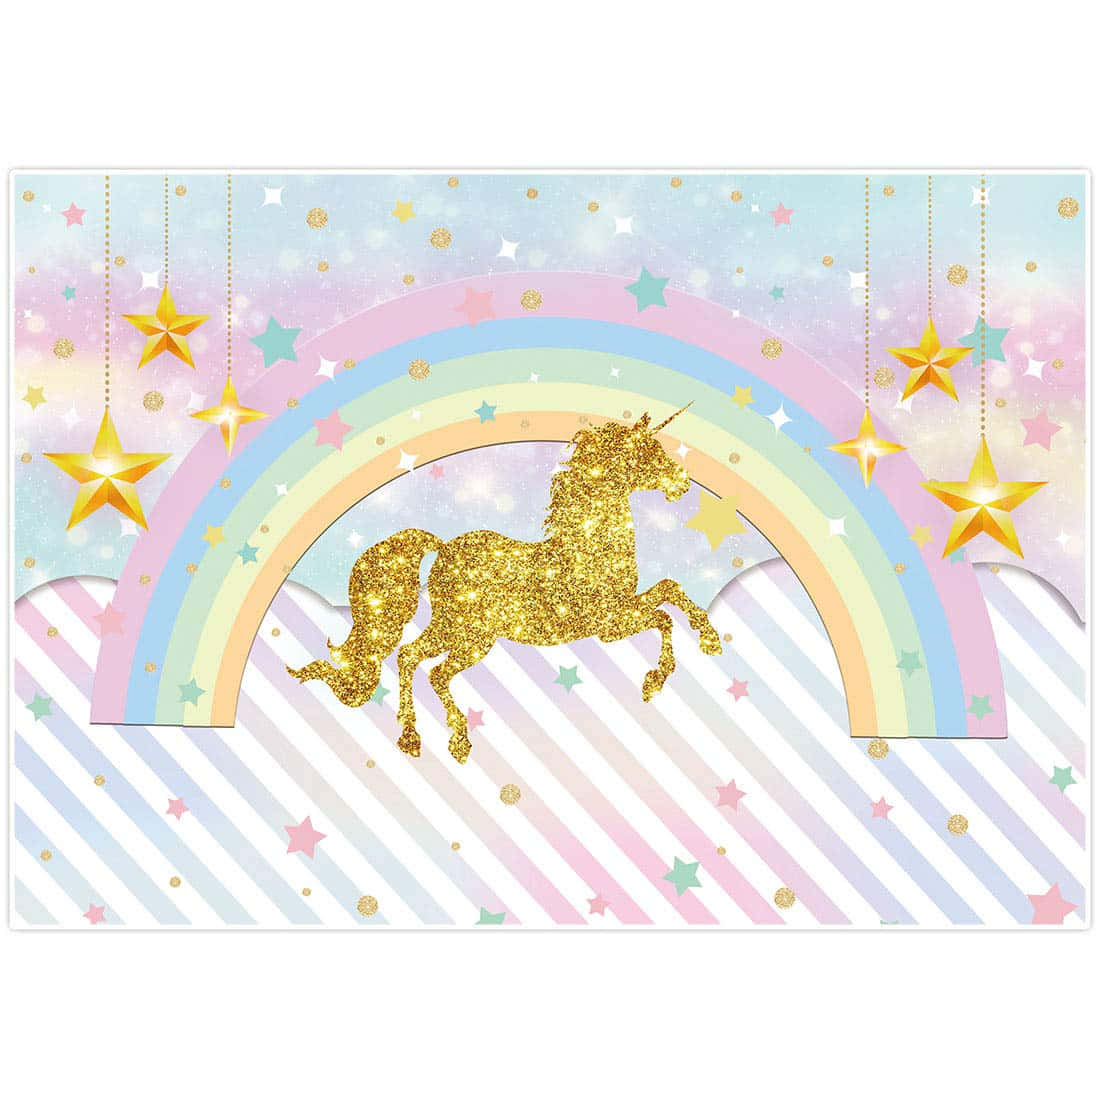 Let your imagination soar on the back of a Unicorn through a Rainbow